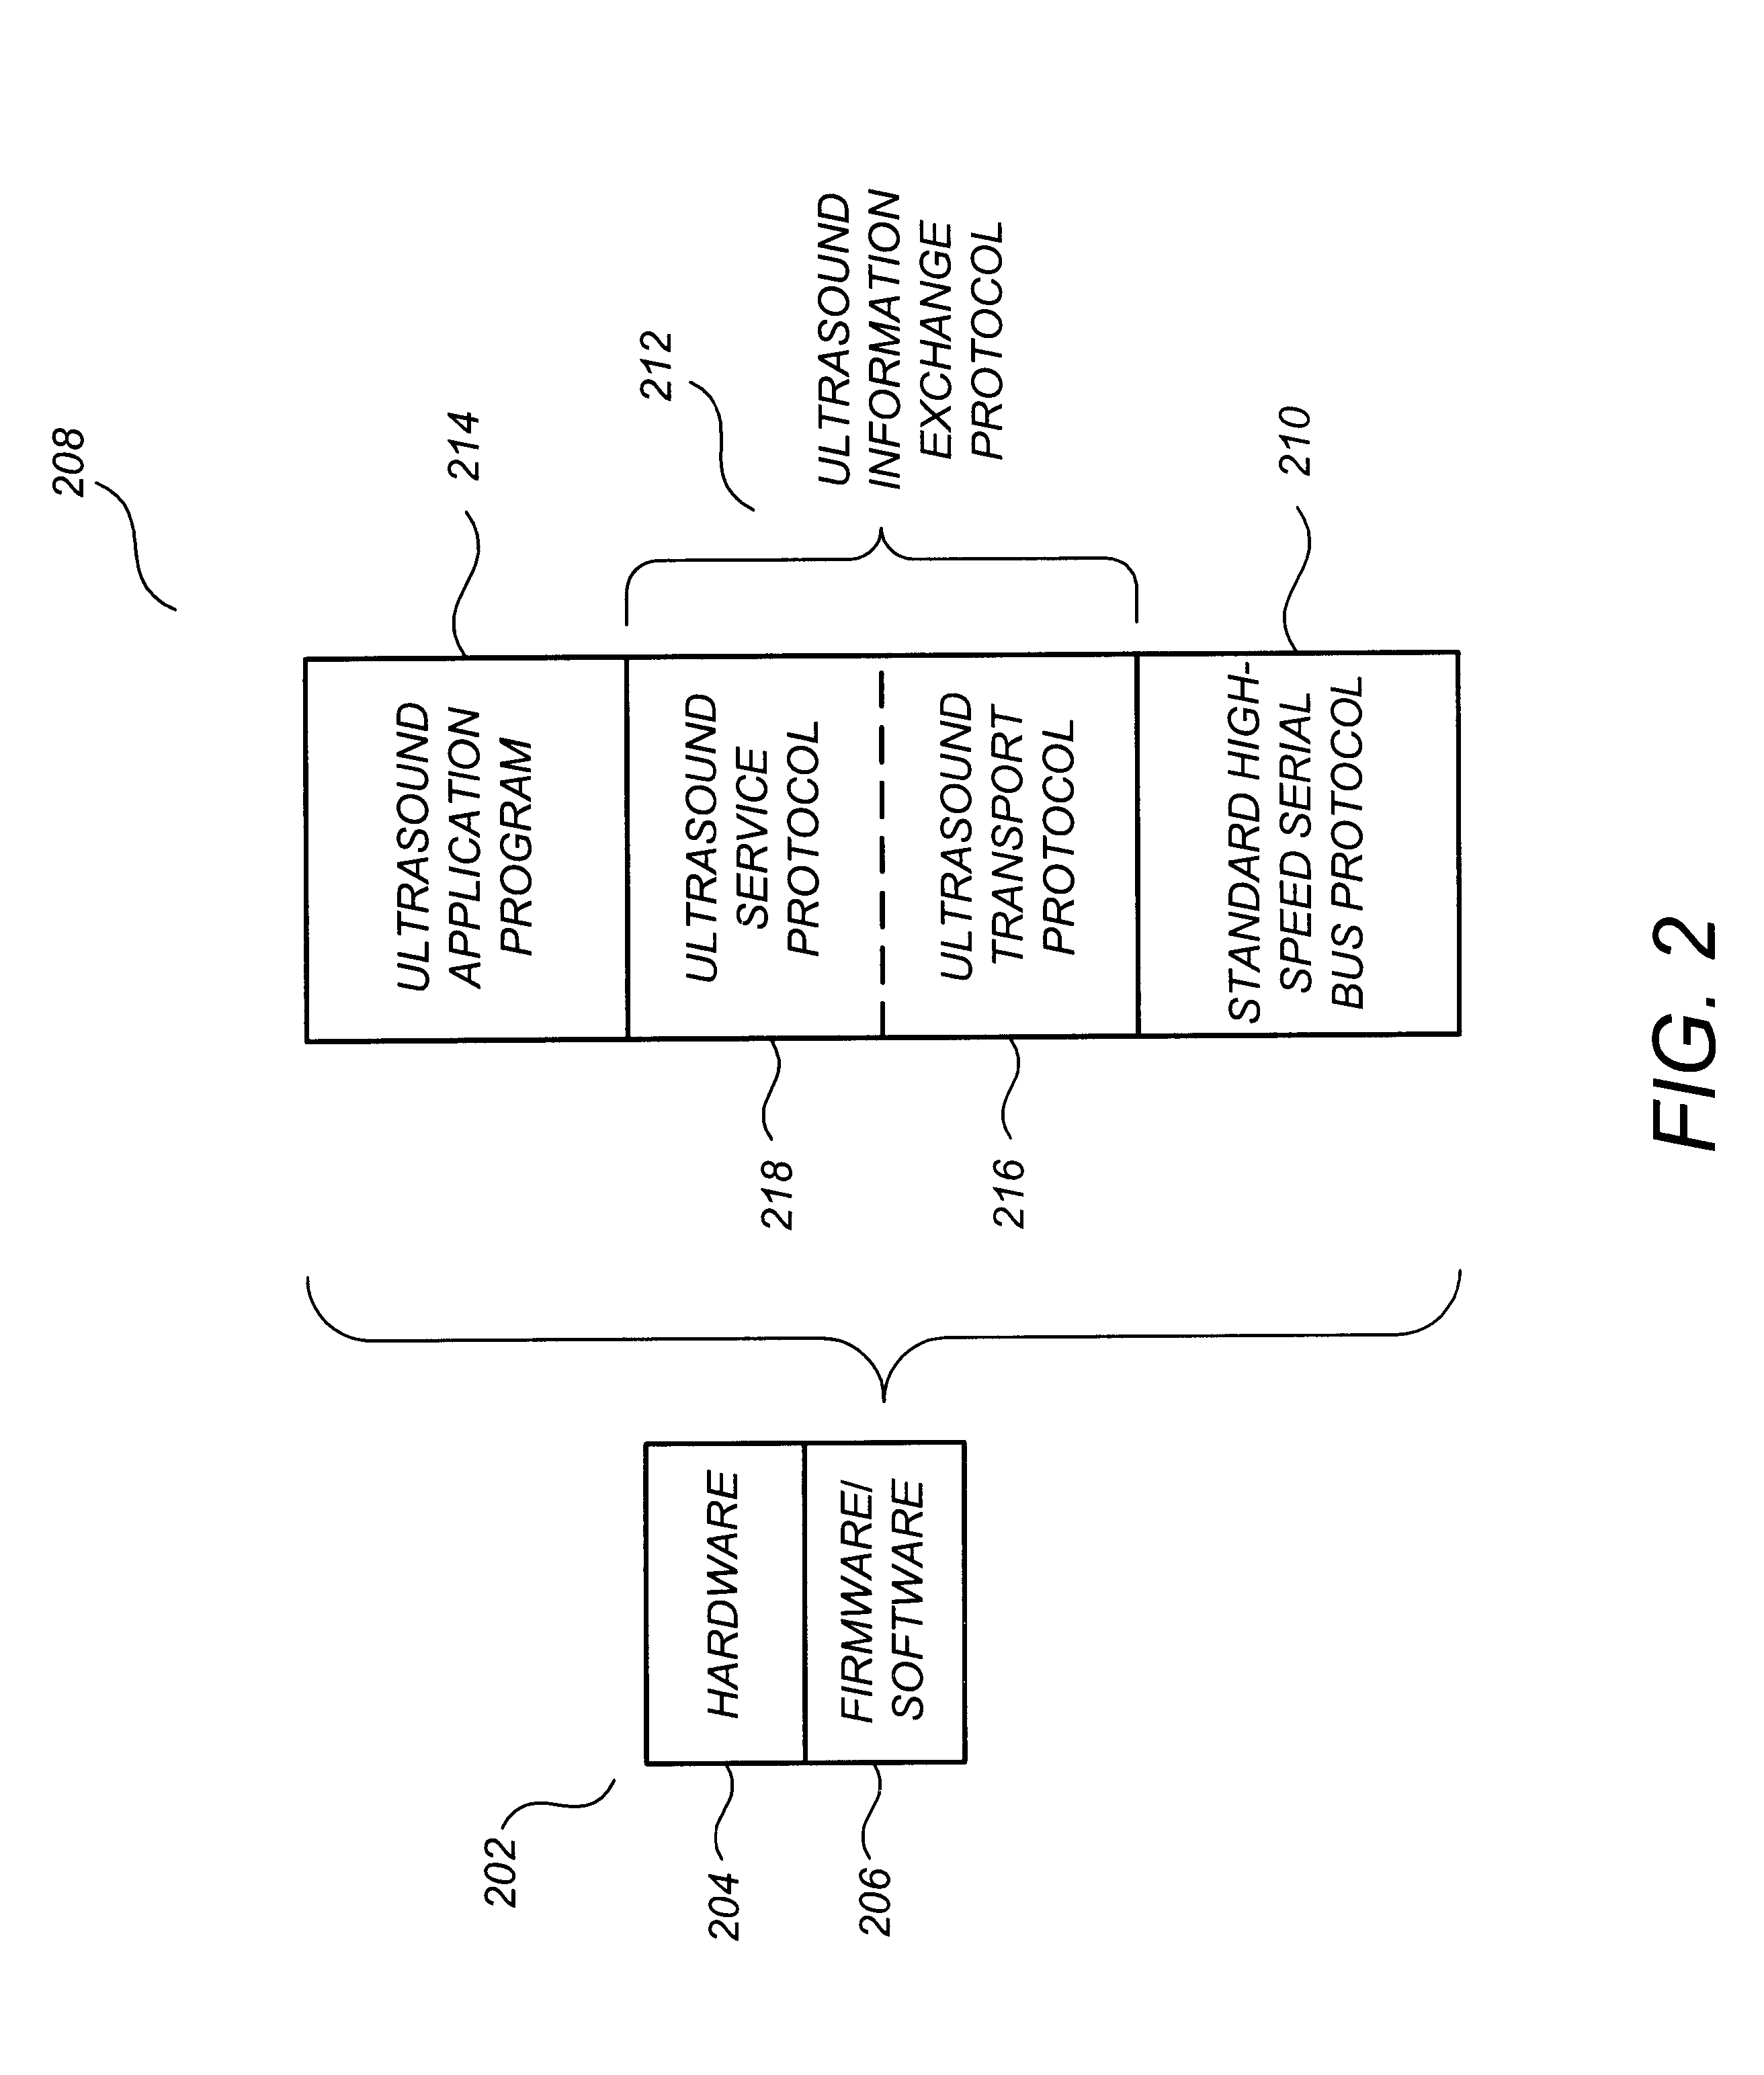 Ultrasound information processing system and ultrasound information exchange protocol therefor